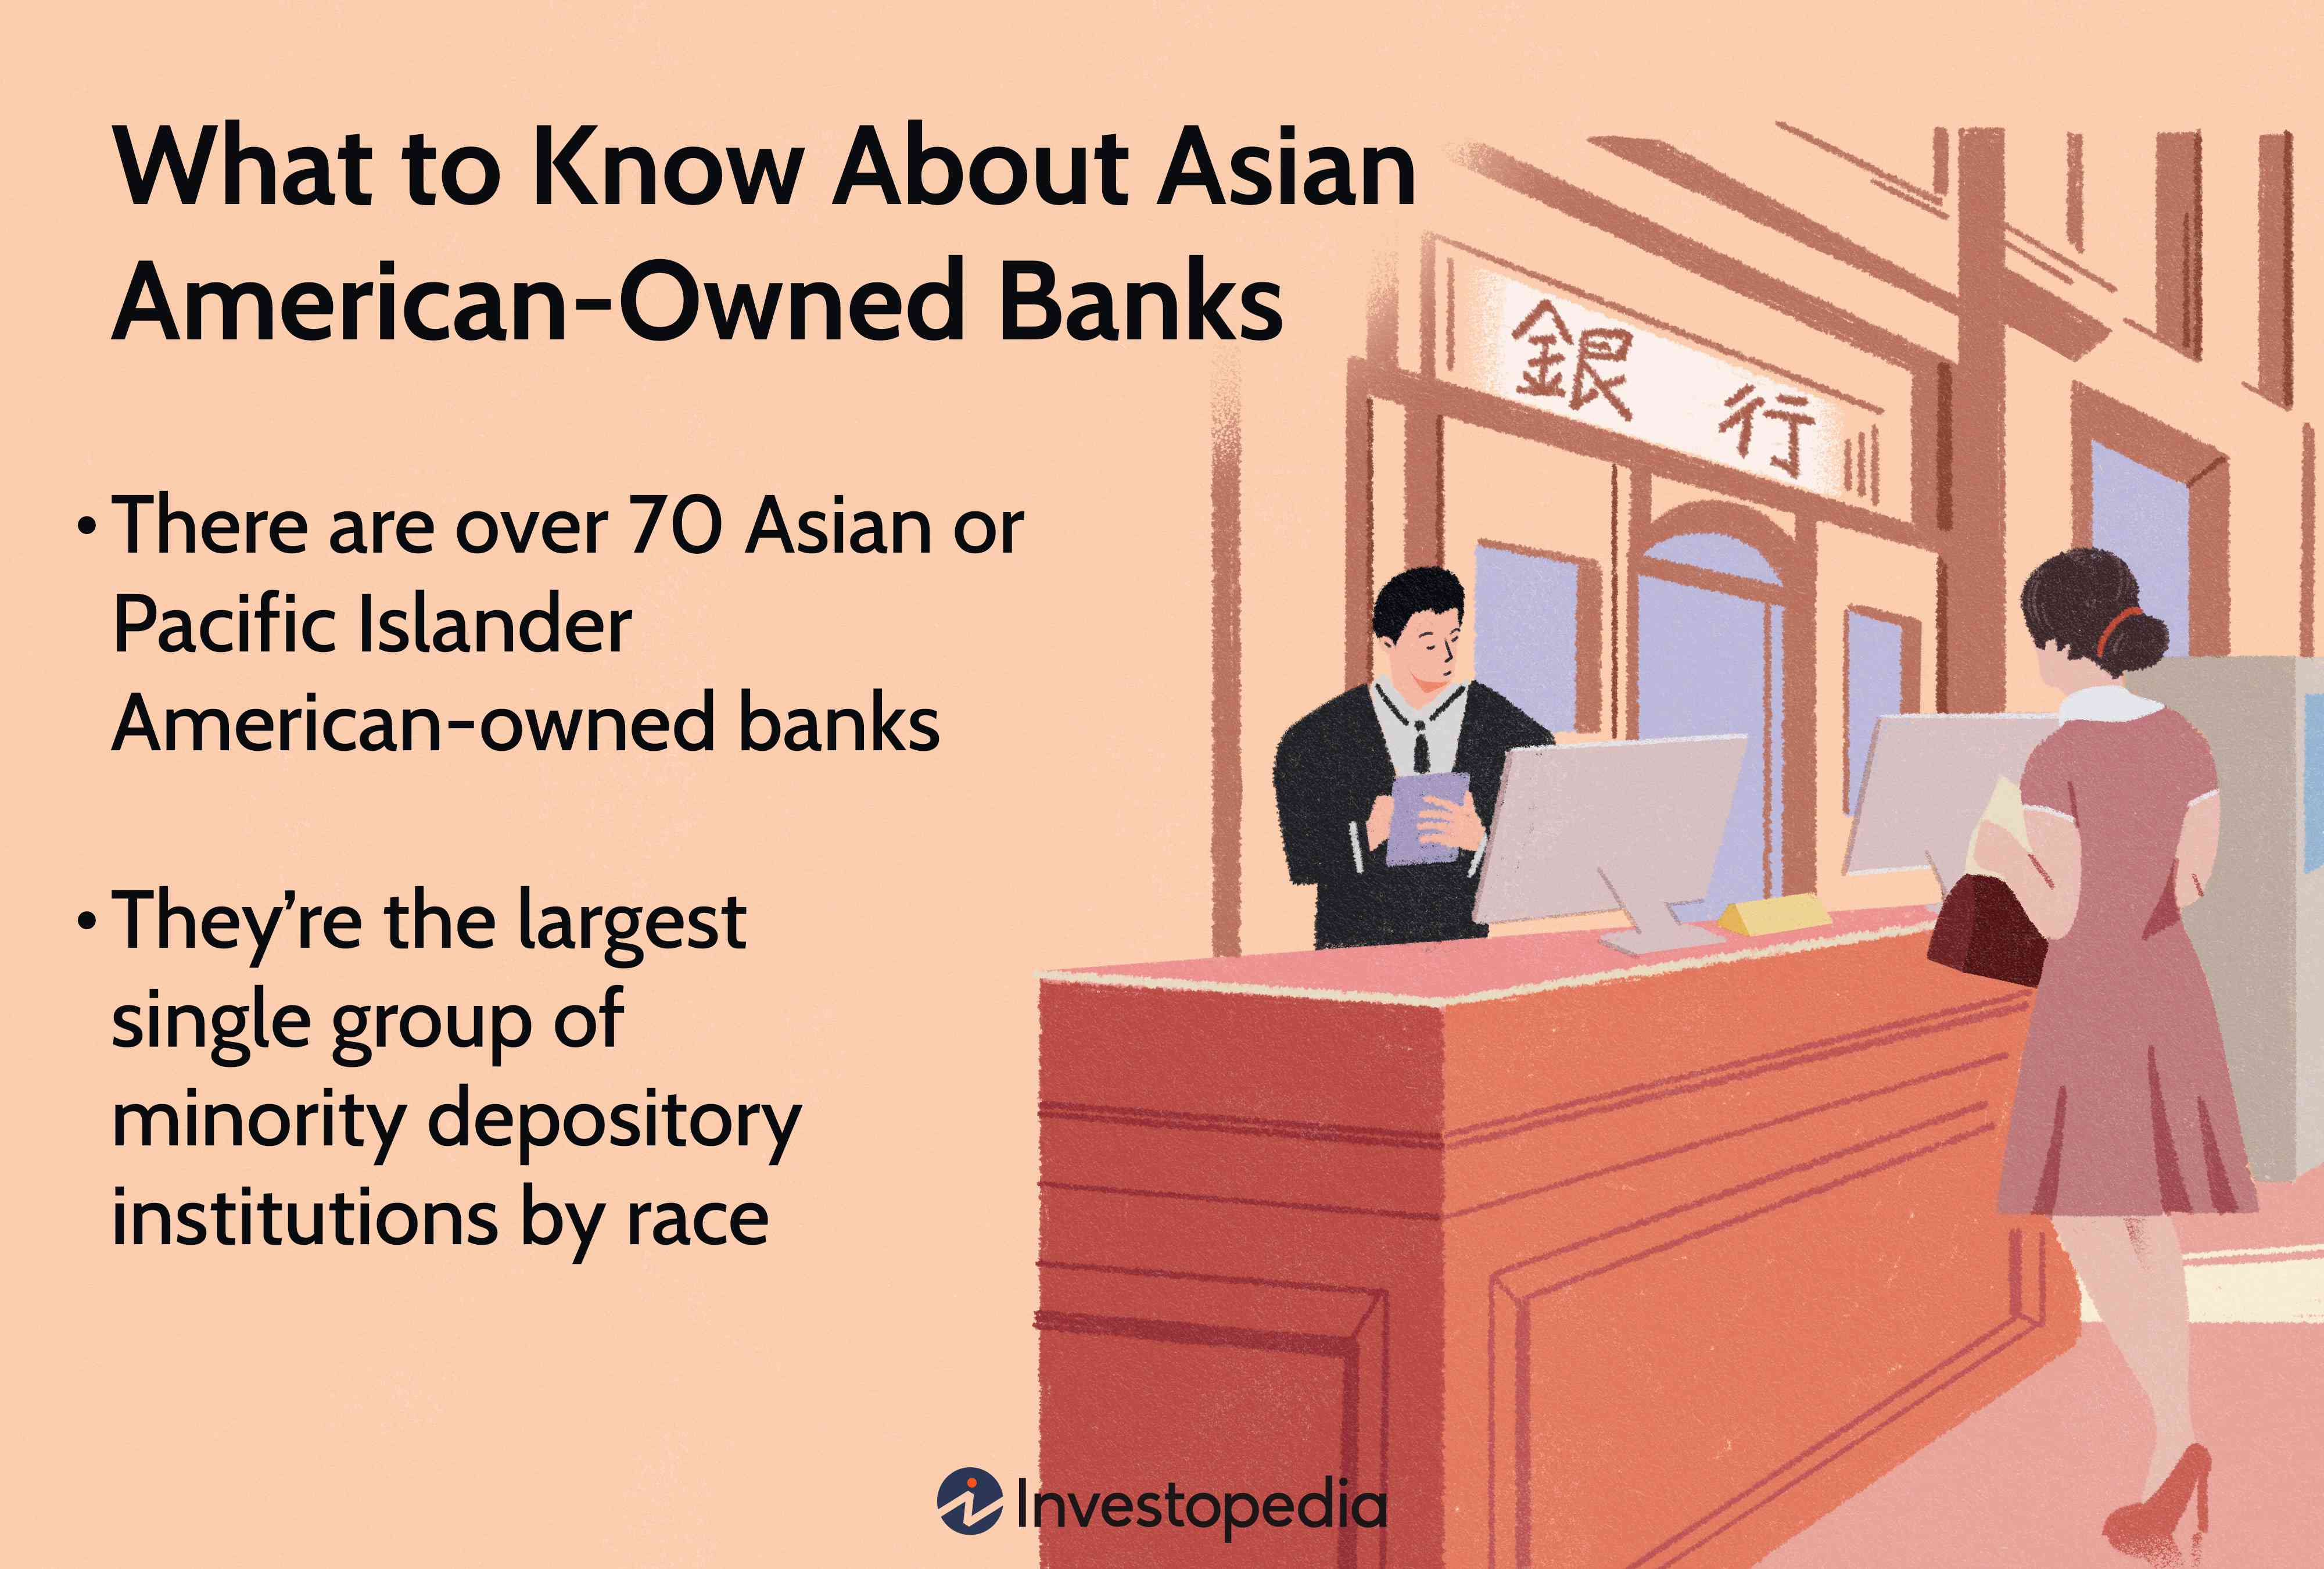 What to Know About Asian American-Owned Banks